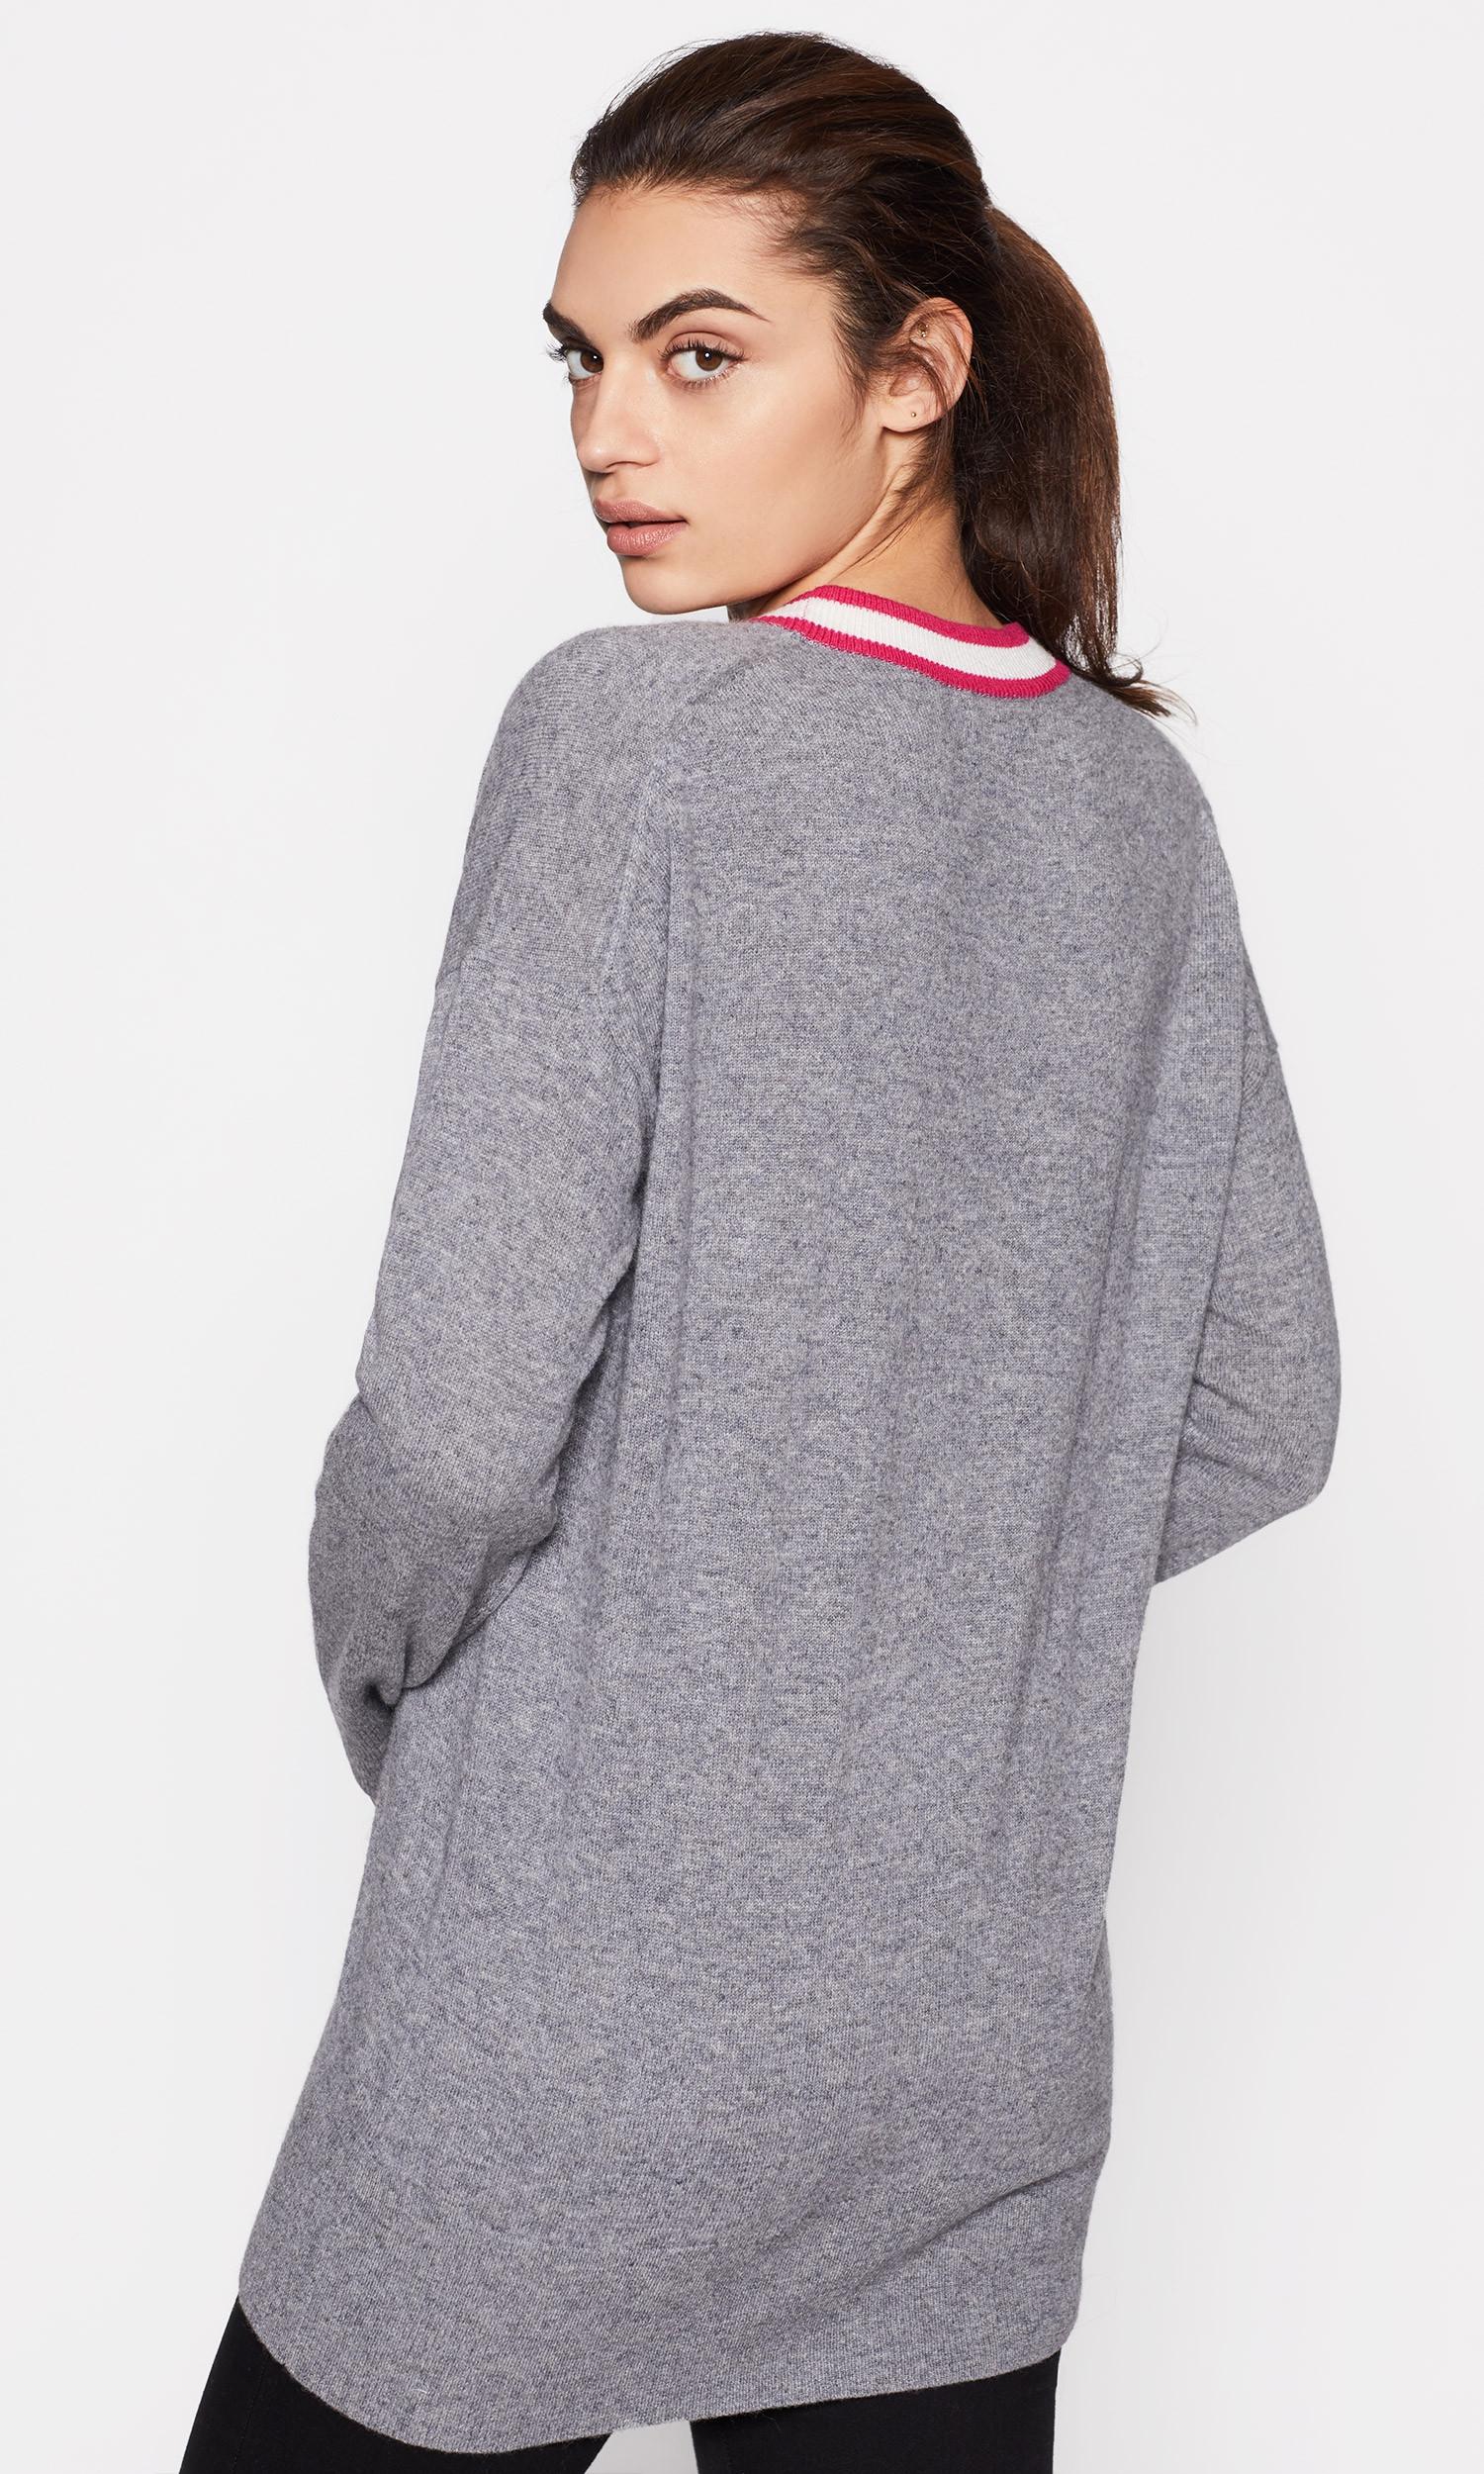 Equipment Gia Cardigan With Piping in Gray - Lyst